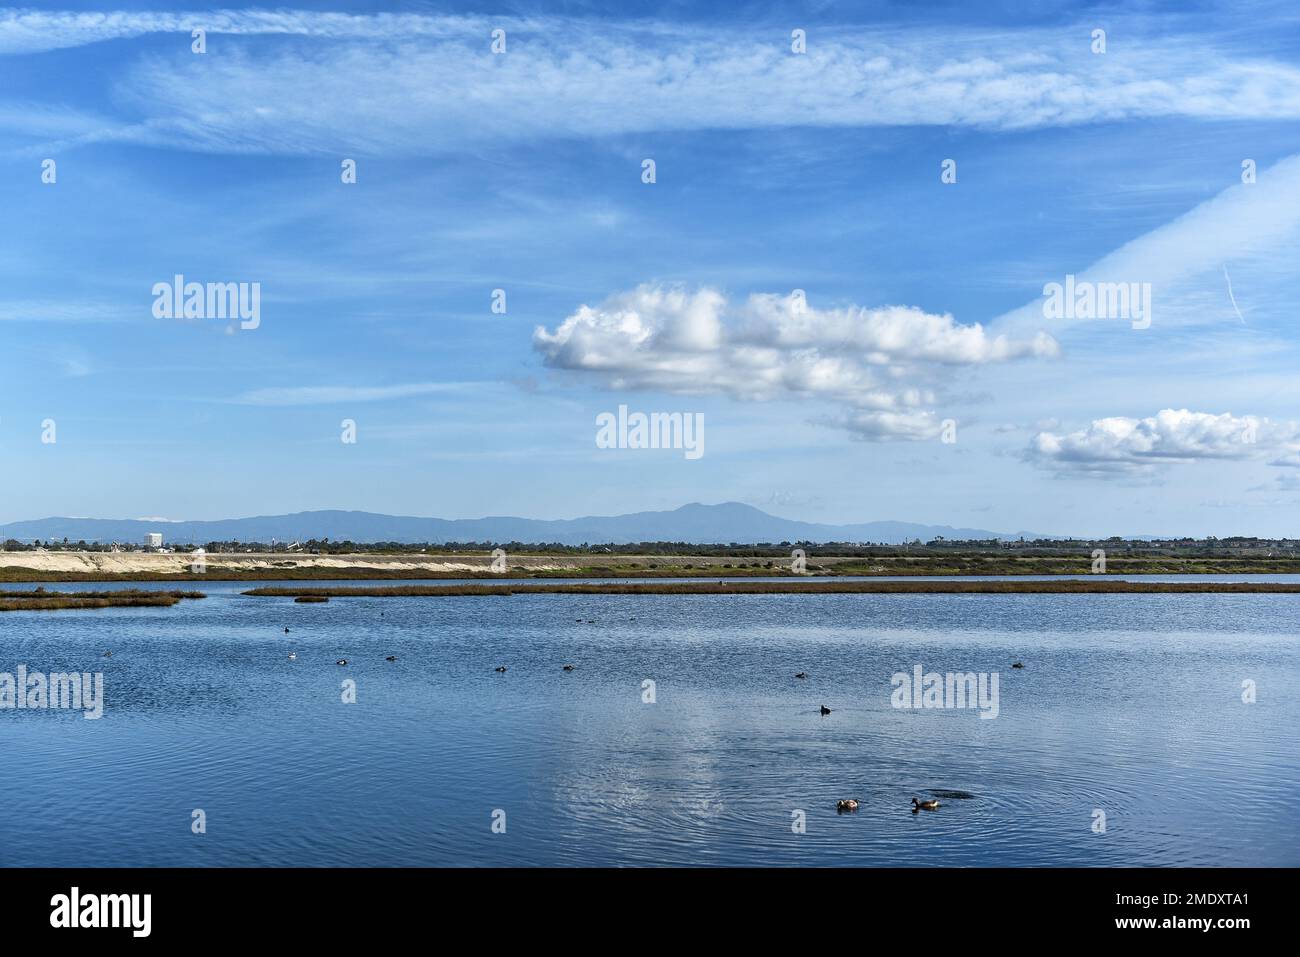 The Bolsa Chica Ecological Reserve, the largest saltwater marsh along the coast of California, with the Santa An Mountains in the distance, Stock Photo